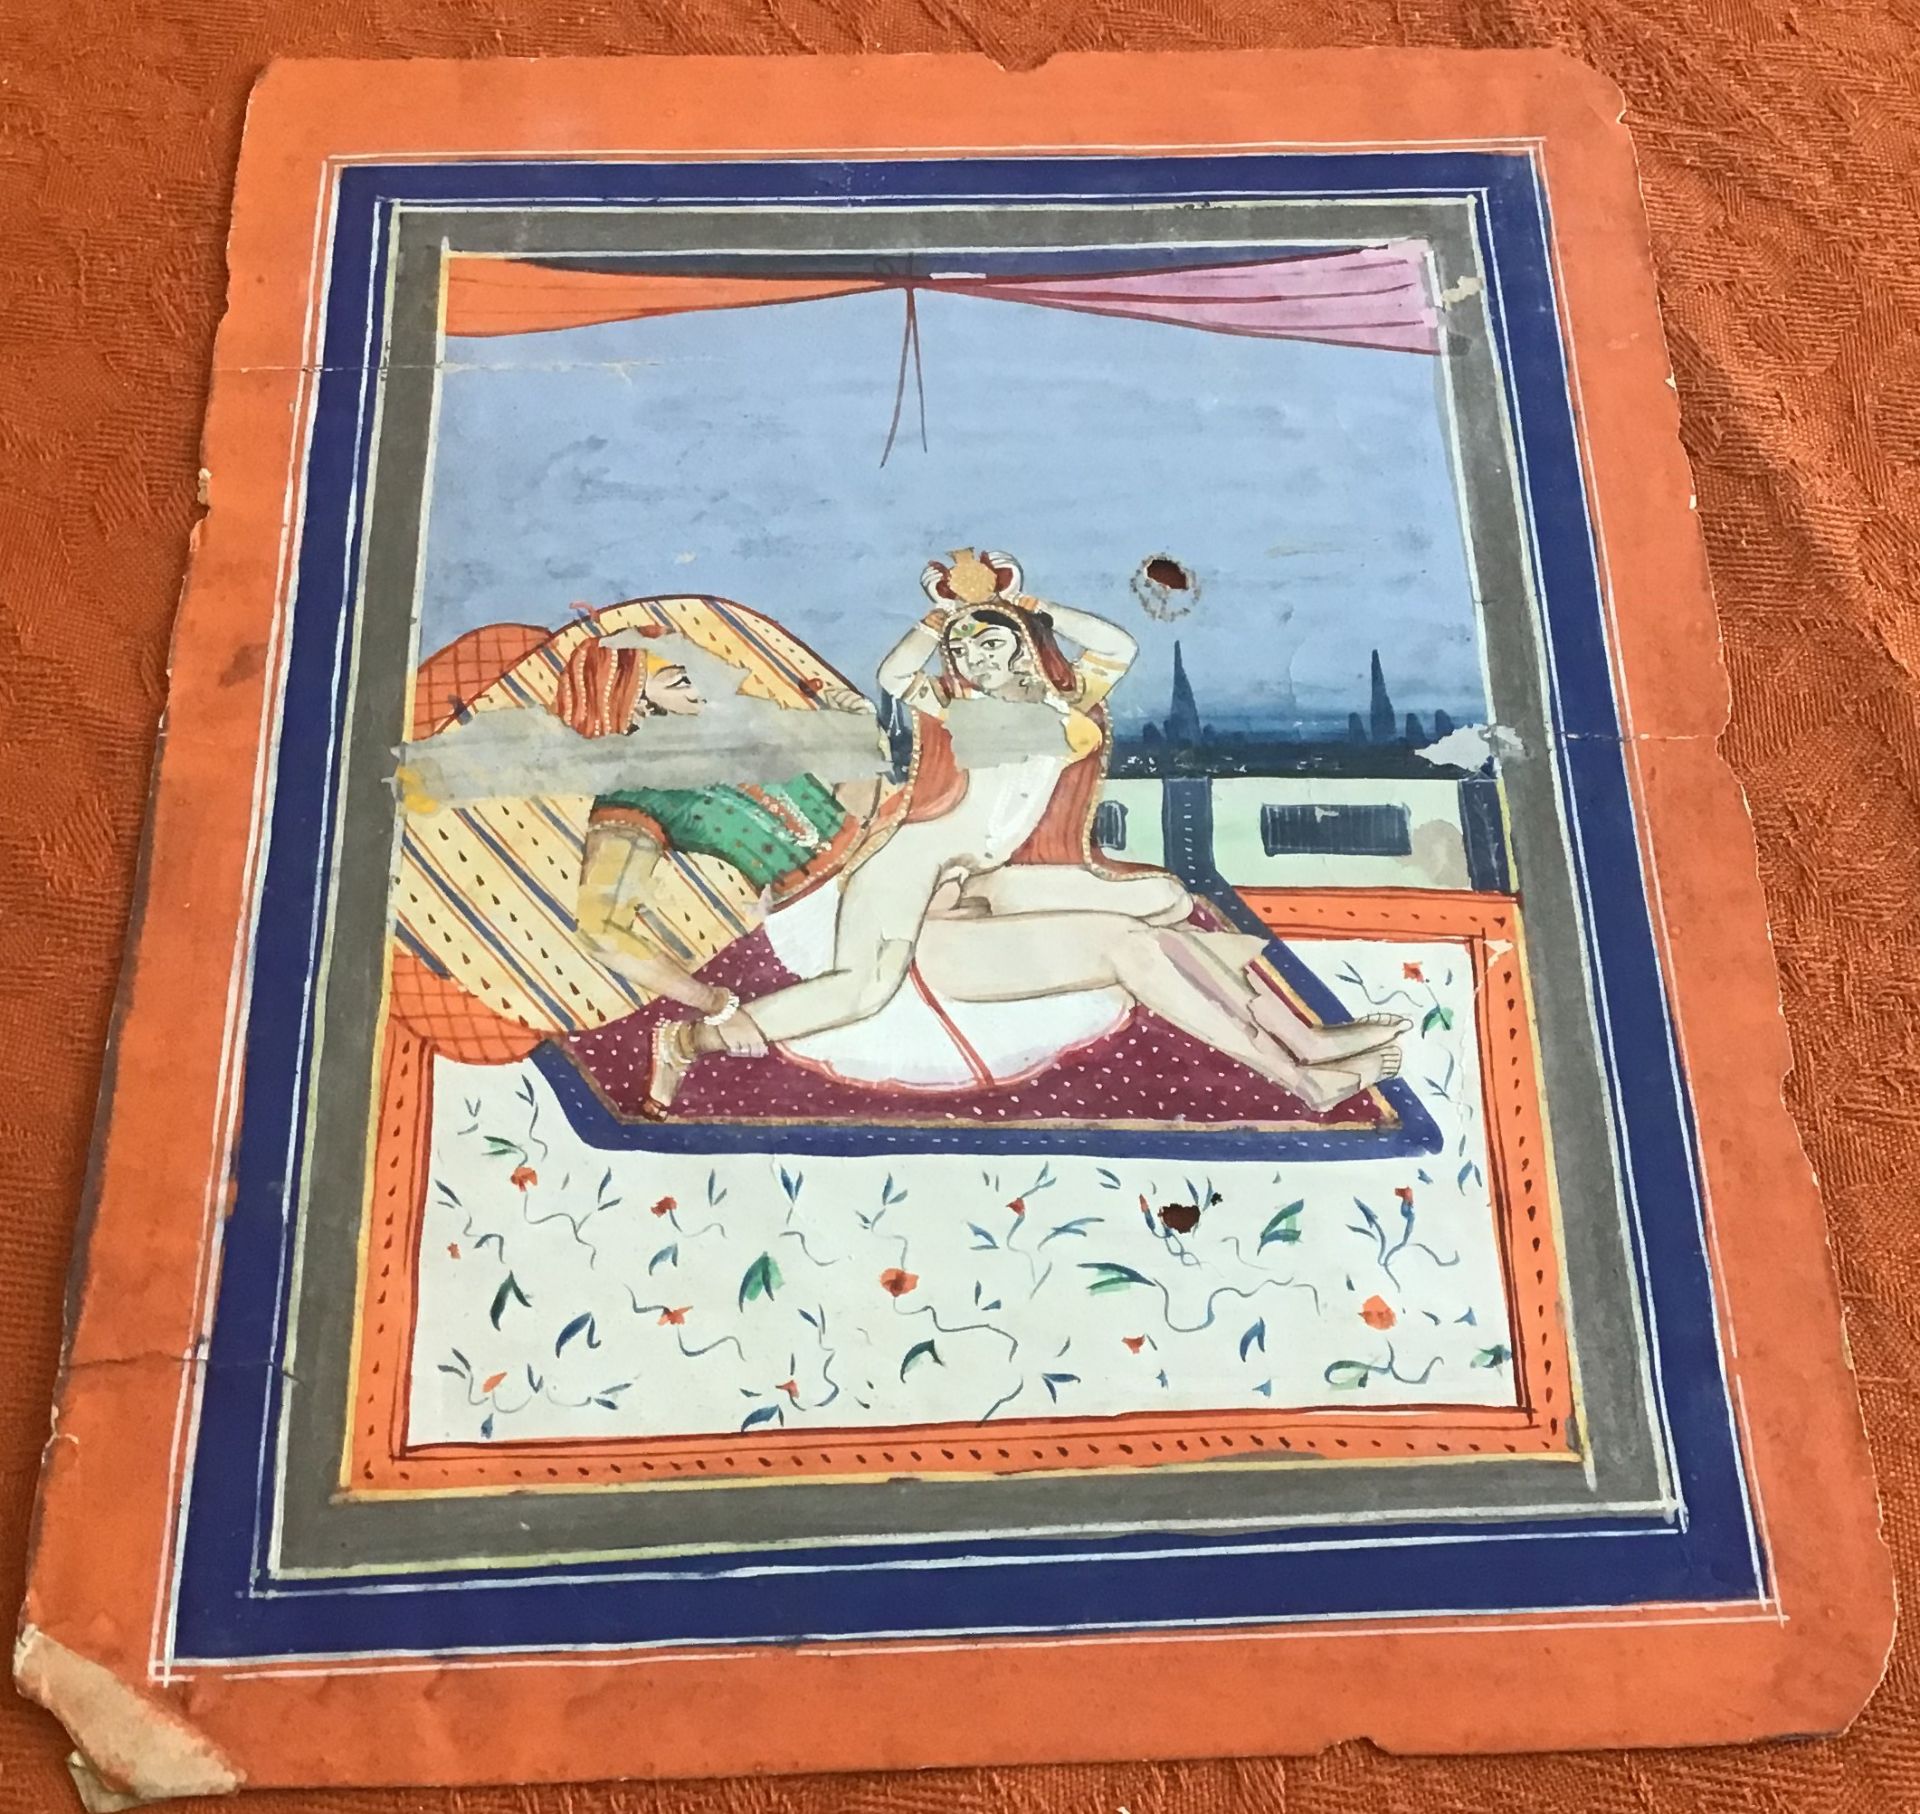 EIGHT EROTIC PAINTINGS. East India. Rajasthan, prob. Jaipur. Late 19th/beg. 20th c. Pigments and - Image 10 of 11